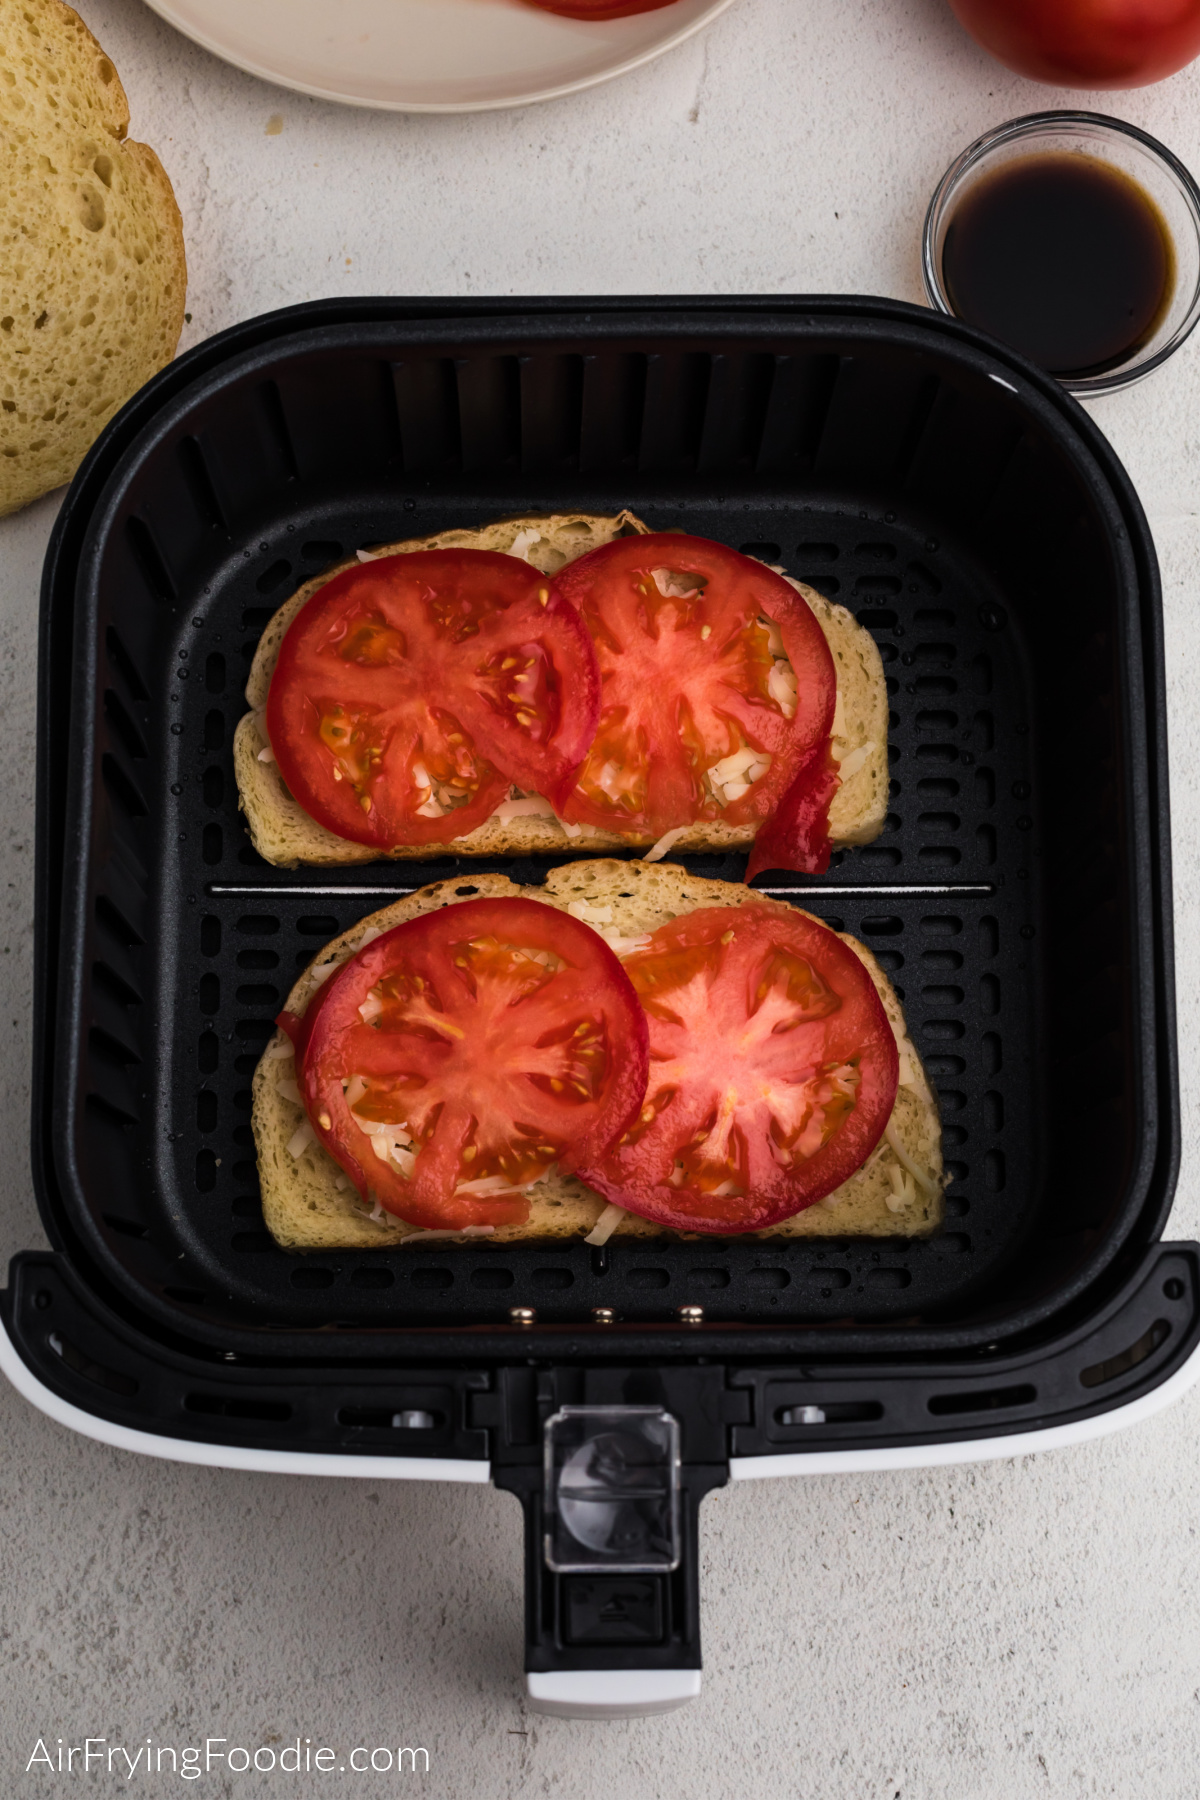 Cheese and sliced tomatoes on sourdough bread in the air fryer basket.